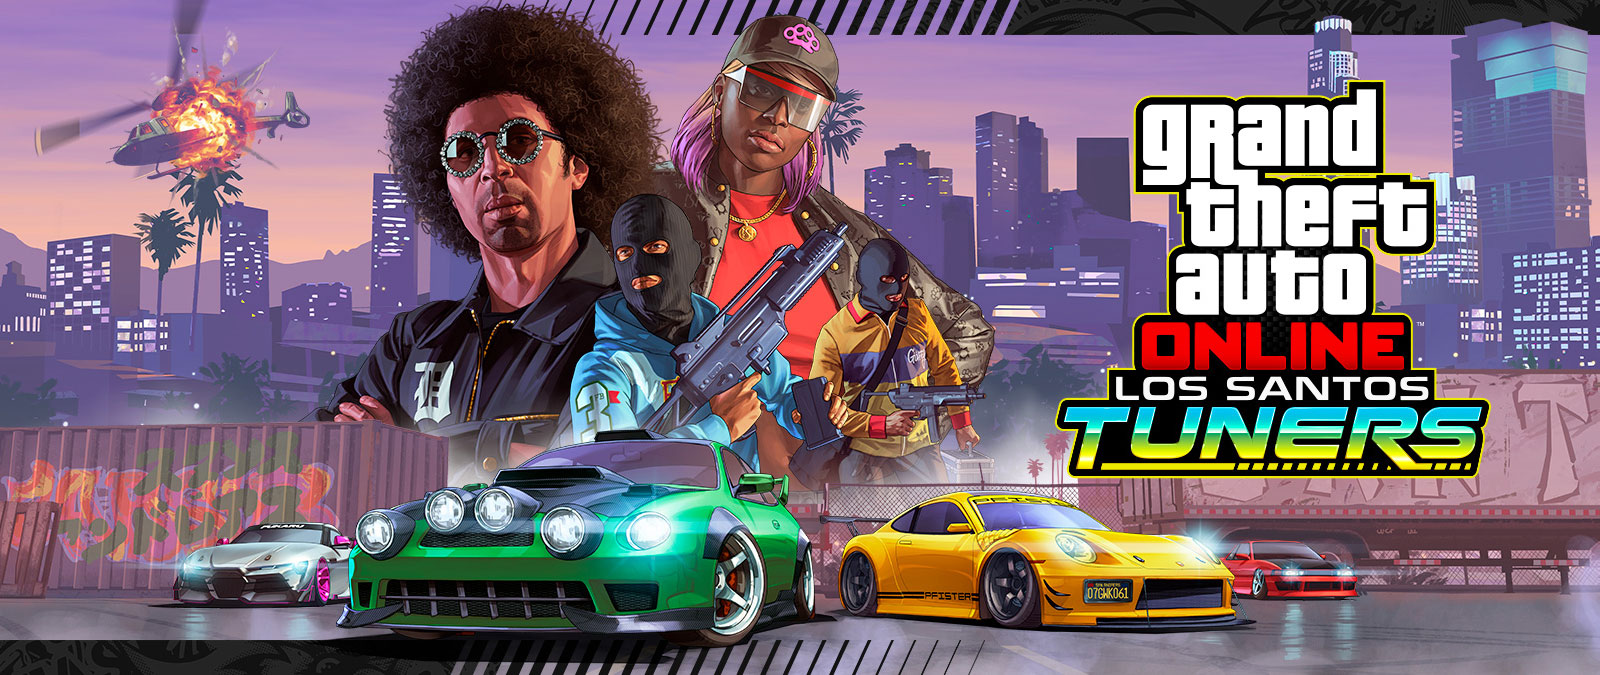 Grand Theft Auto Online, Los Santos Tuners. Four characters posing, in front of a city skyline and four super cars beneath them 